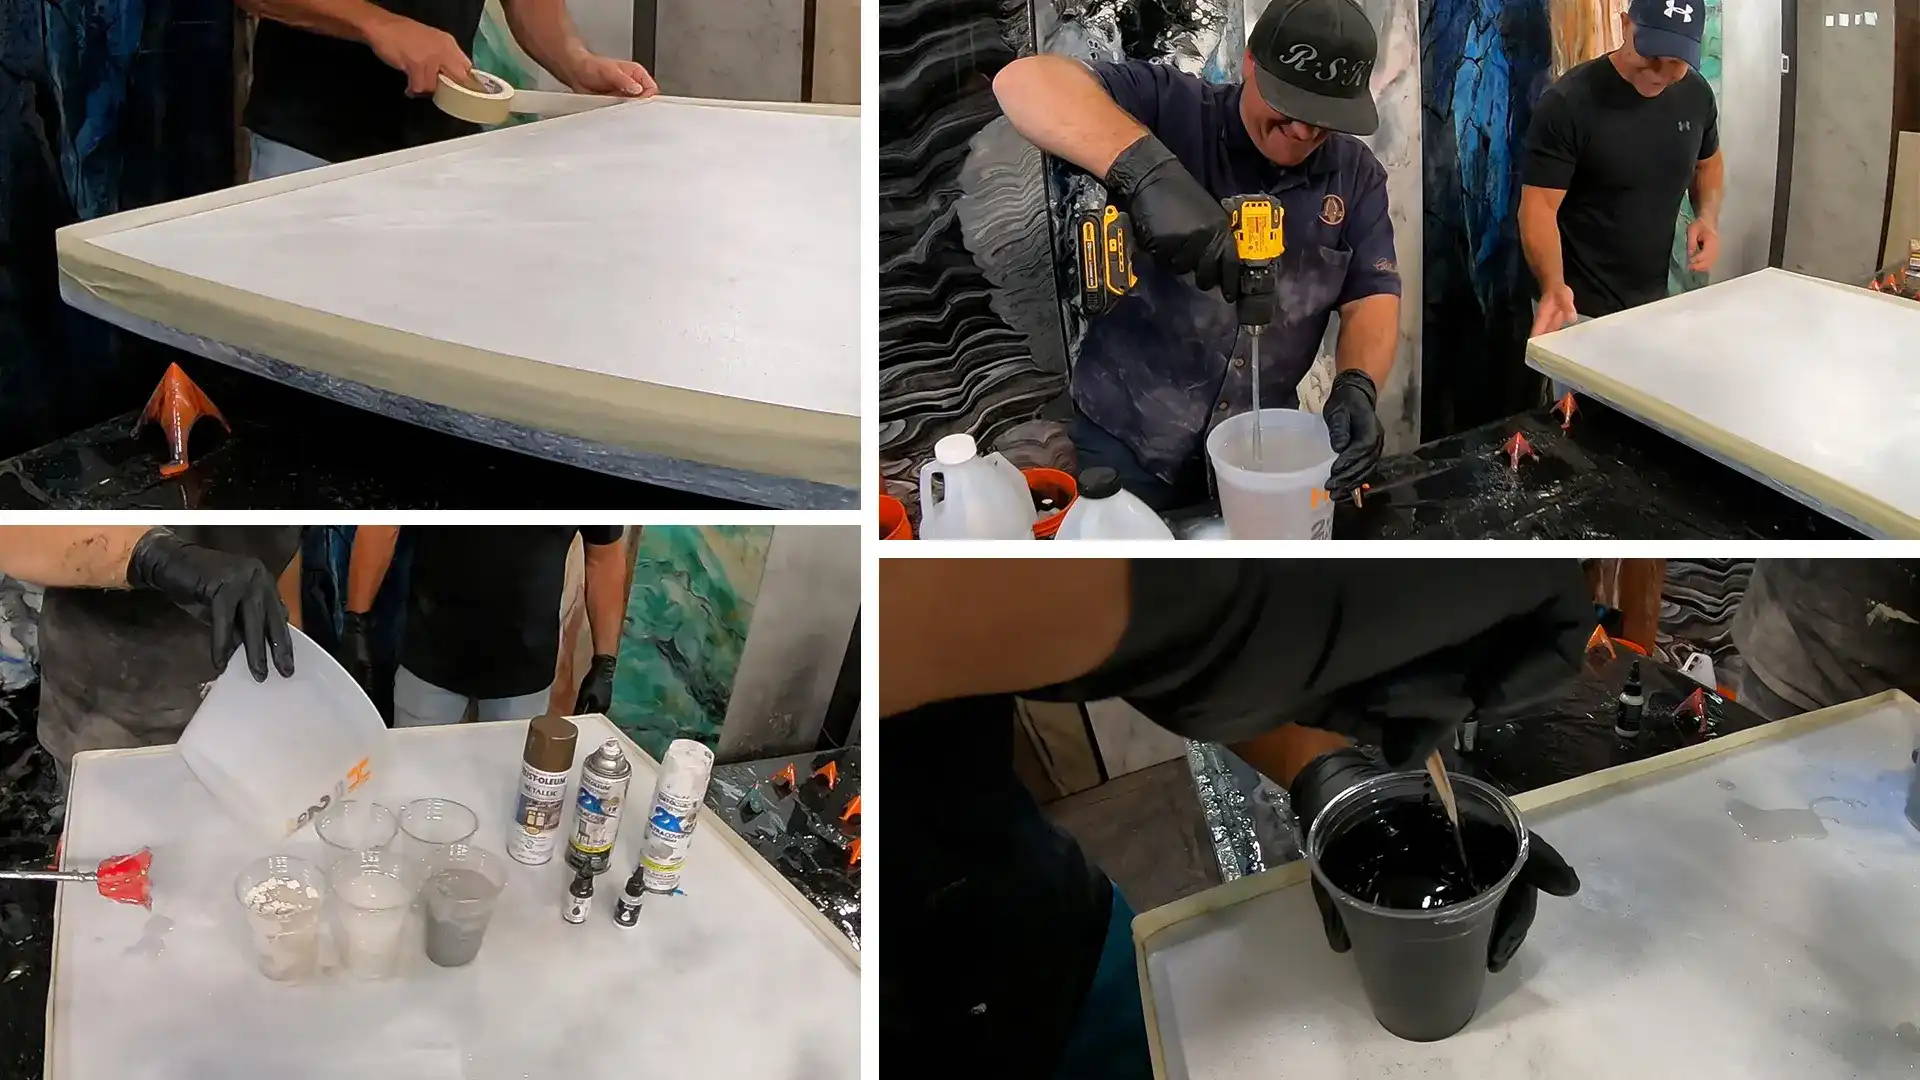 Step #4: Measure out color additives, mix 3 oz/sq ft of epoxy, and combine with additives.